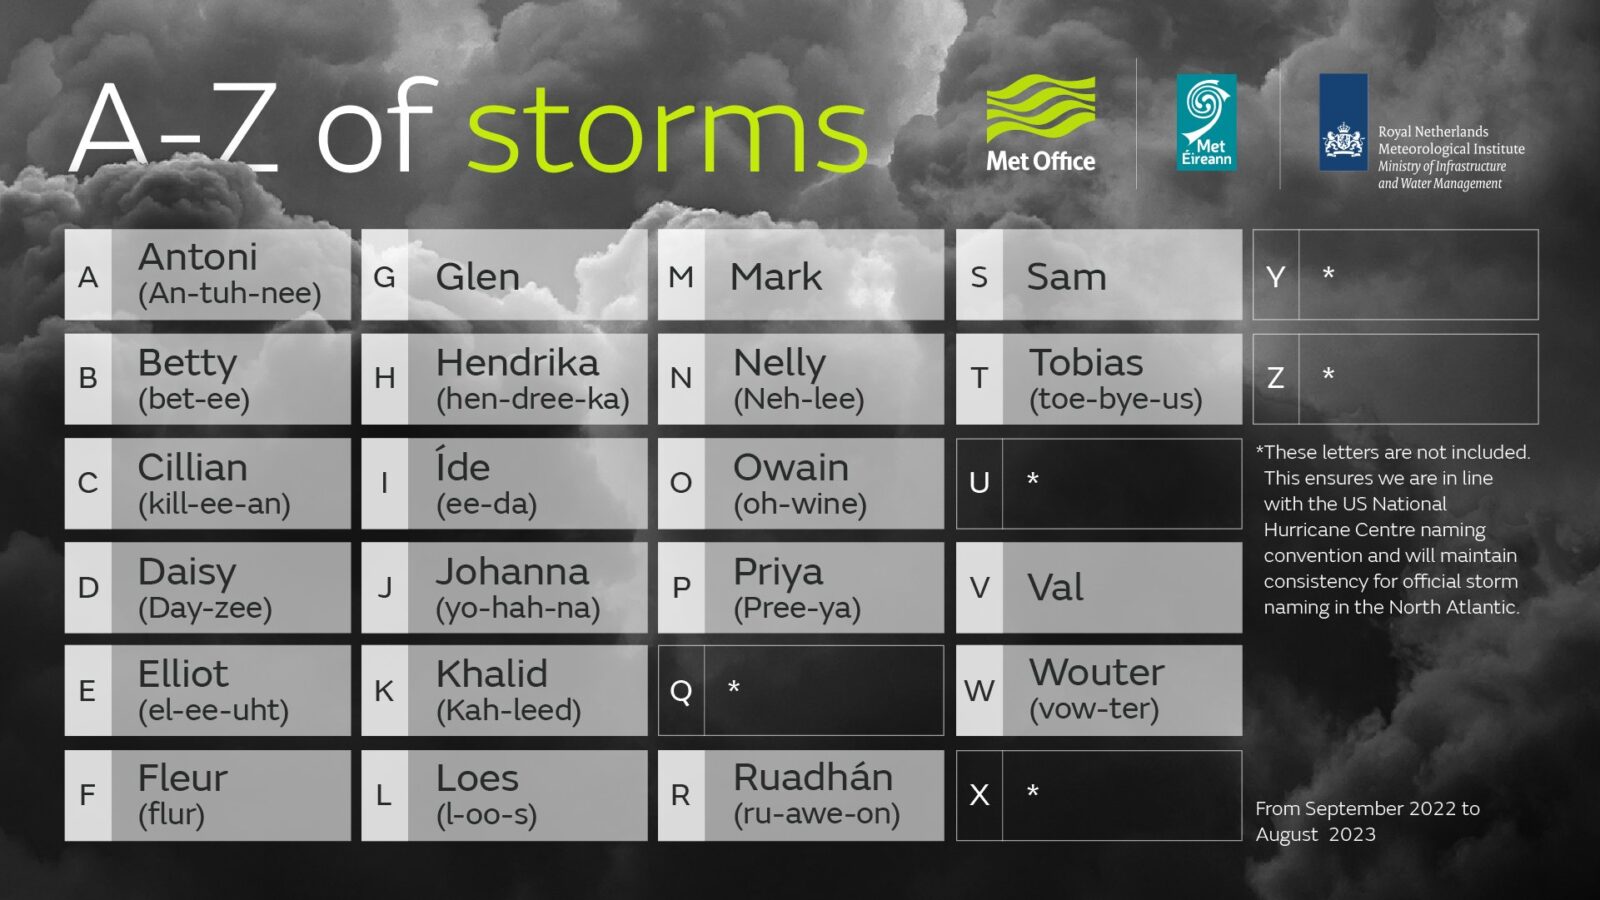 Met Office reveals official list of storm names for 2022/23